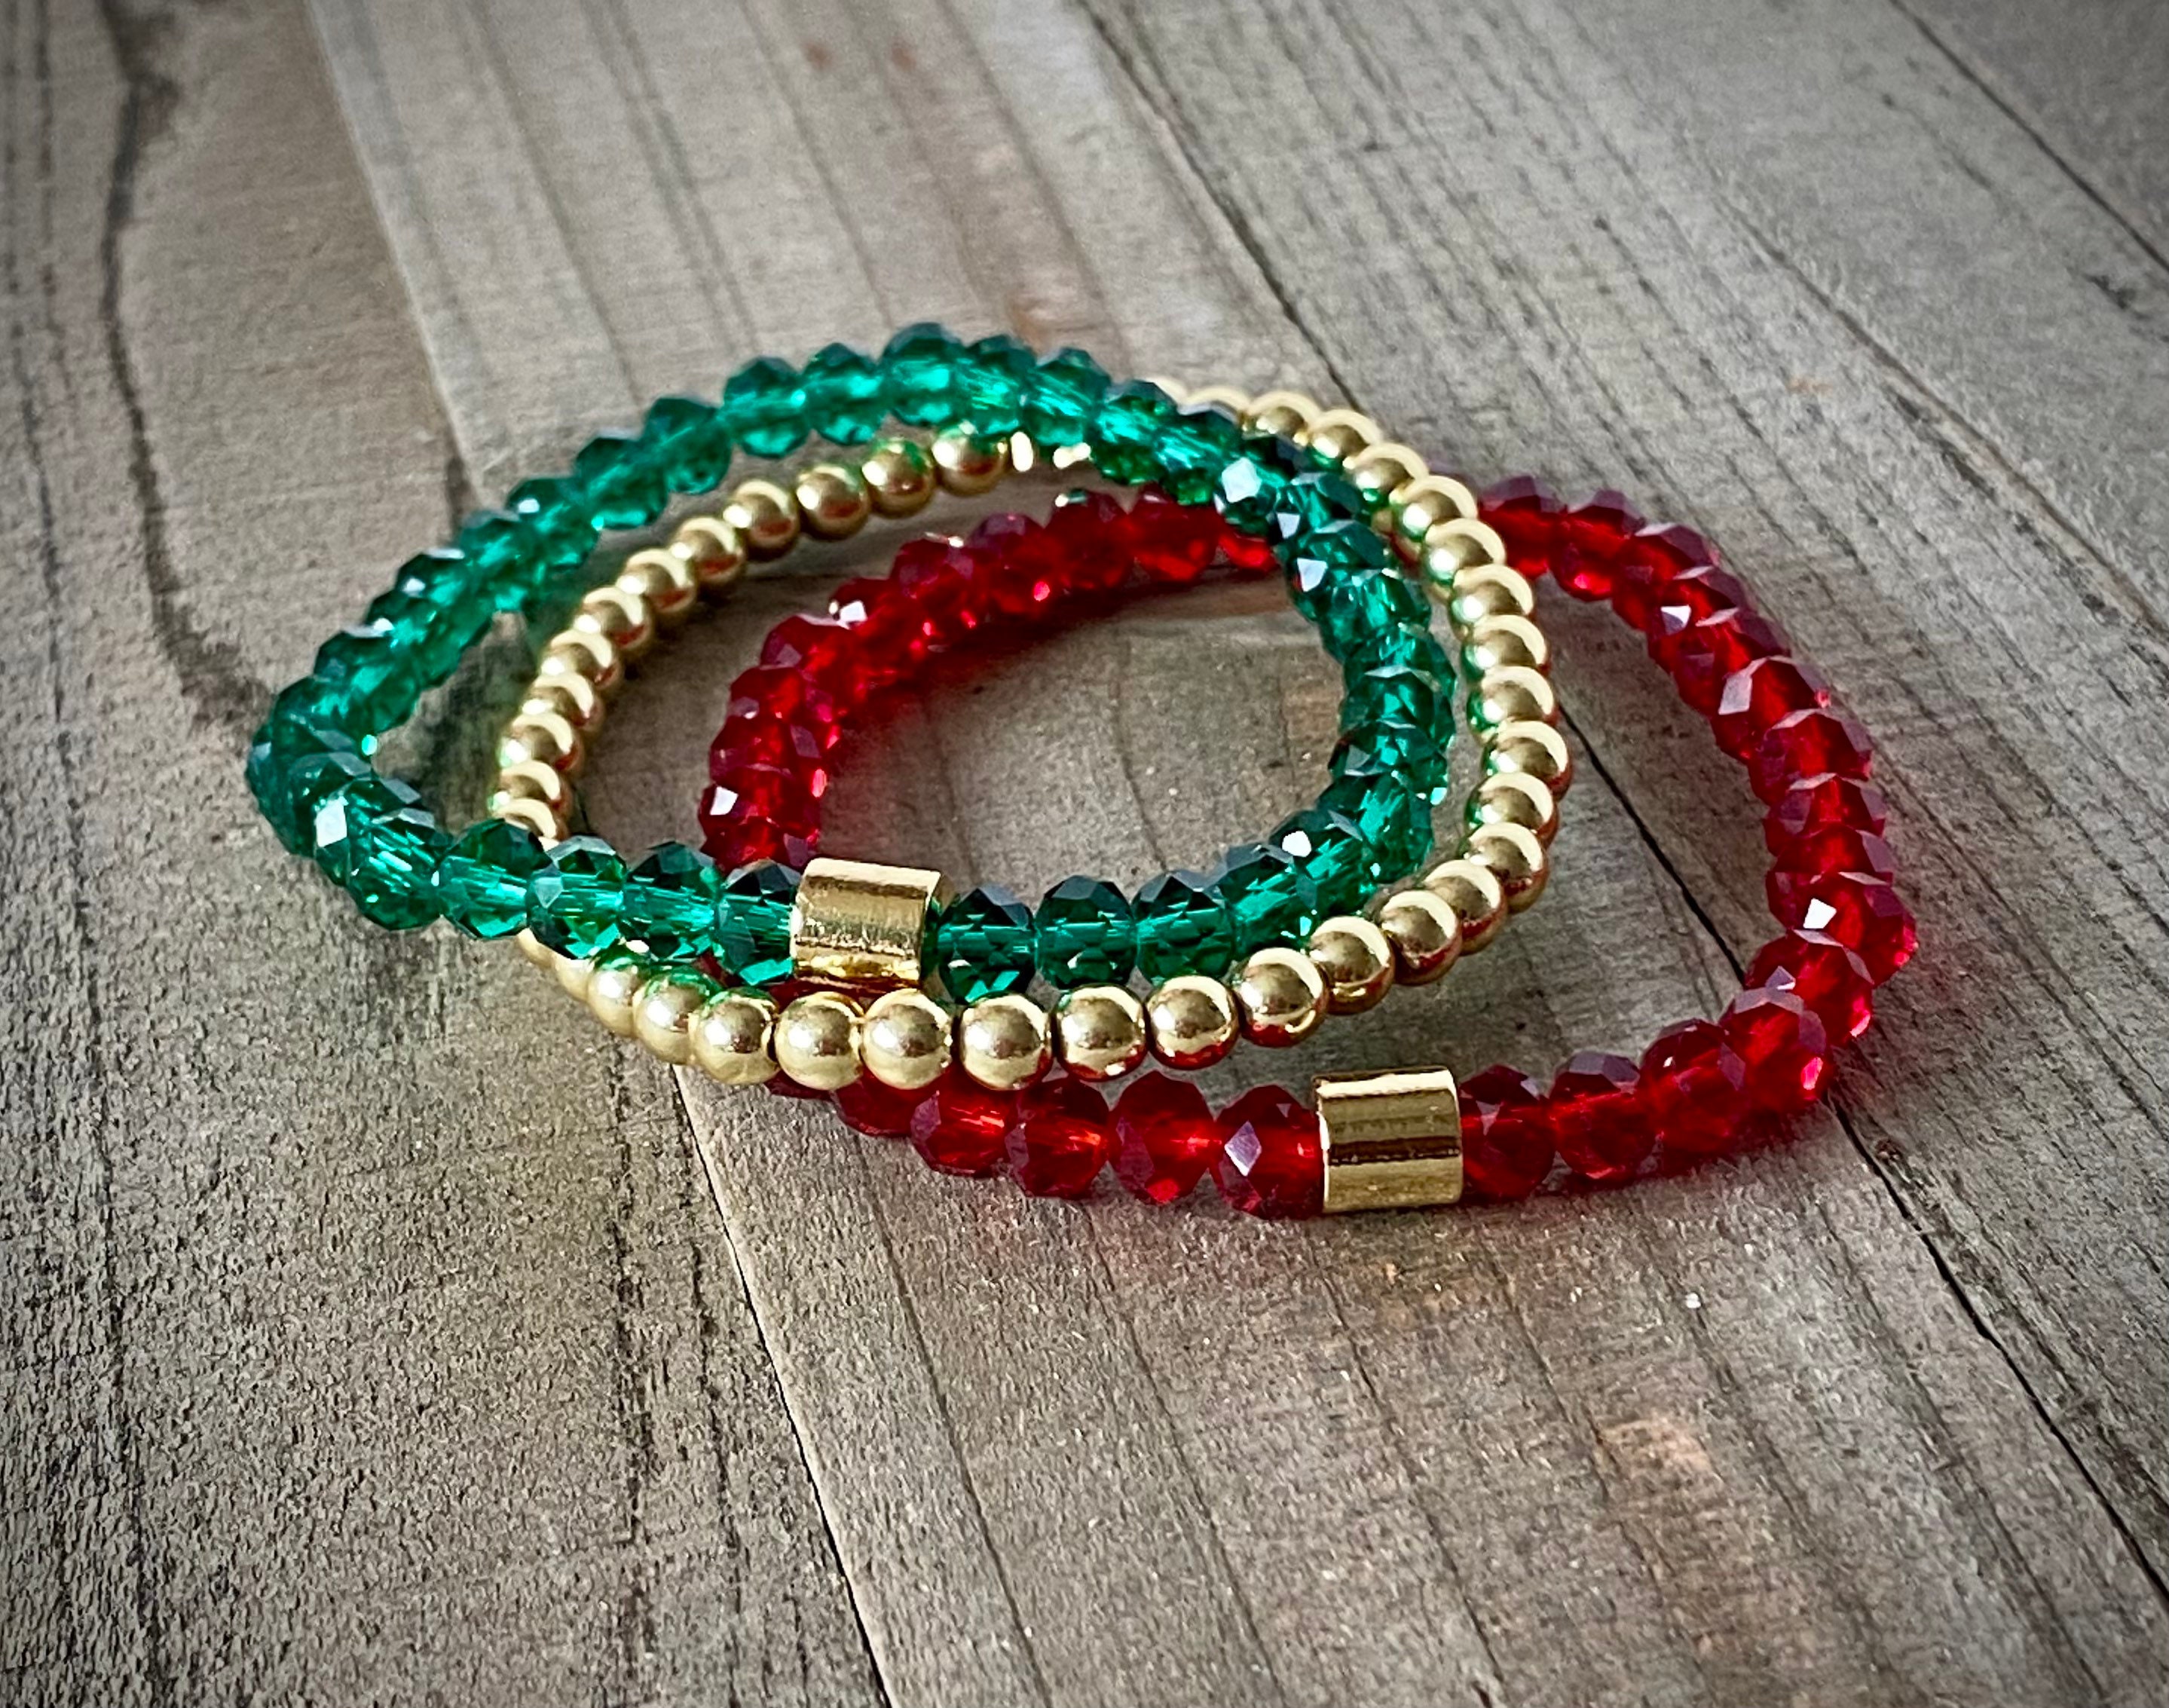 PuRui Creative Red Green Beads Bracelet With Snowman Christmas